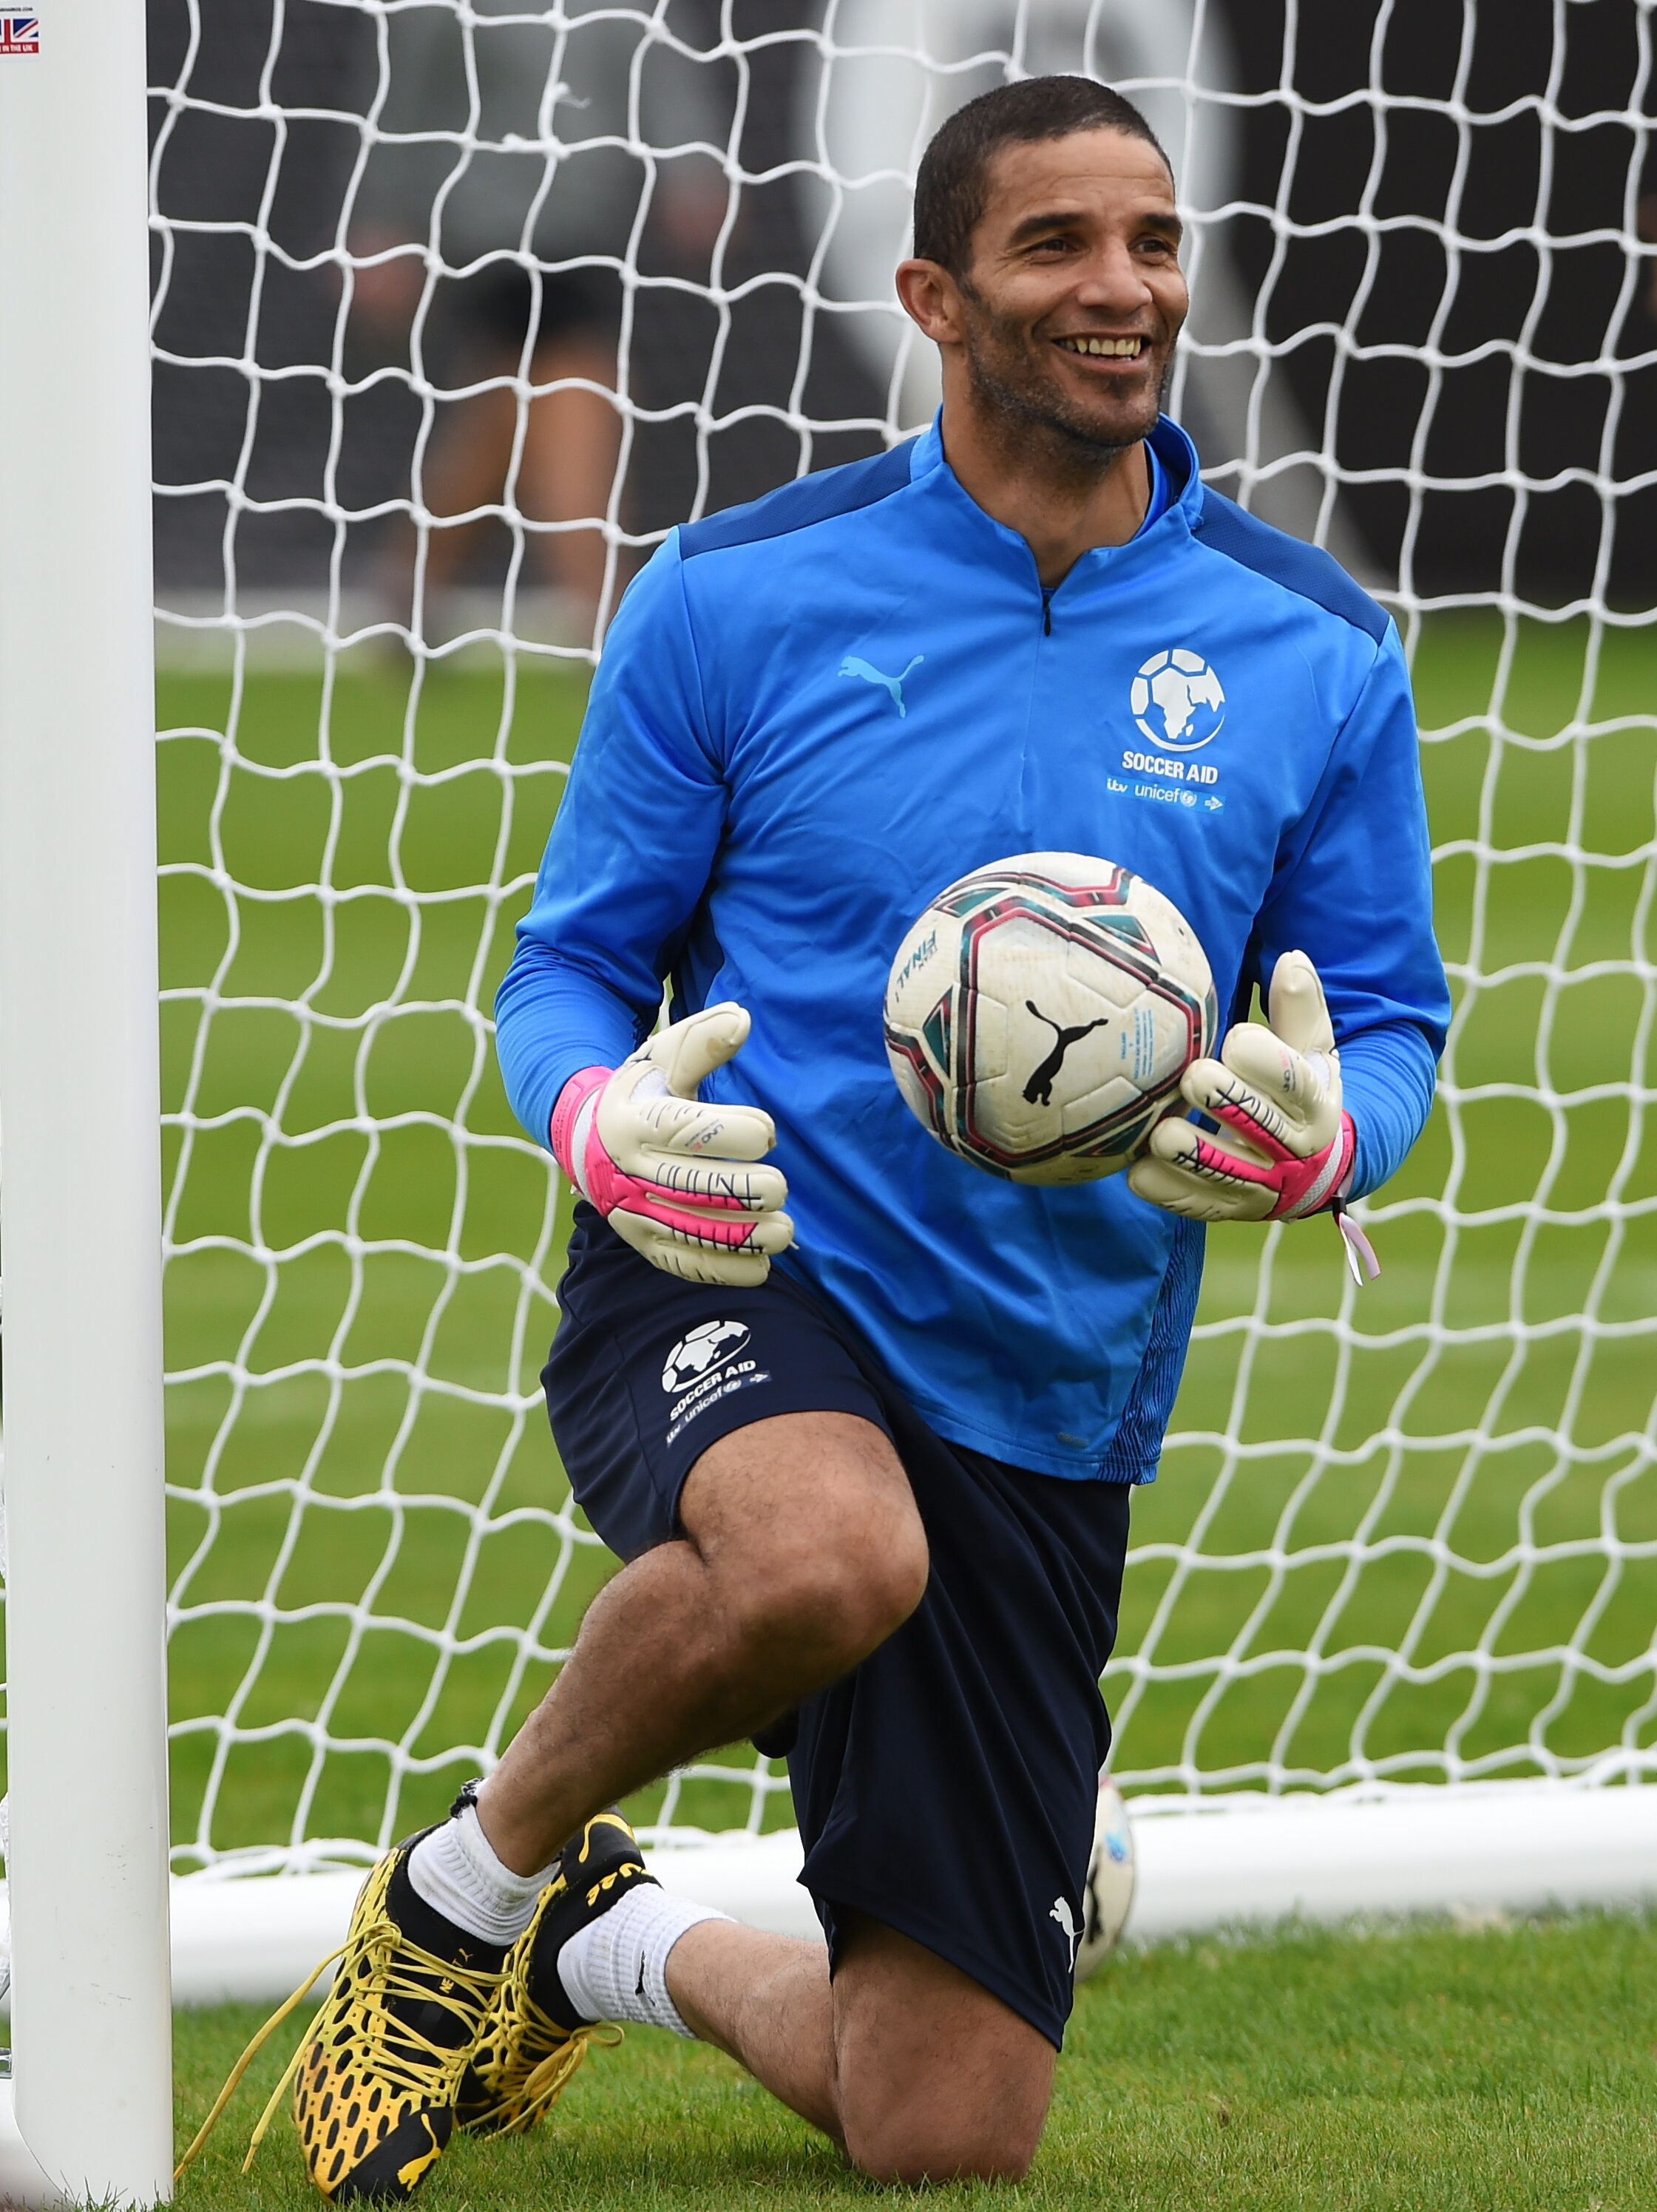 David James will be in action for England at Soccer Aid 2022